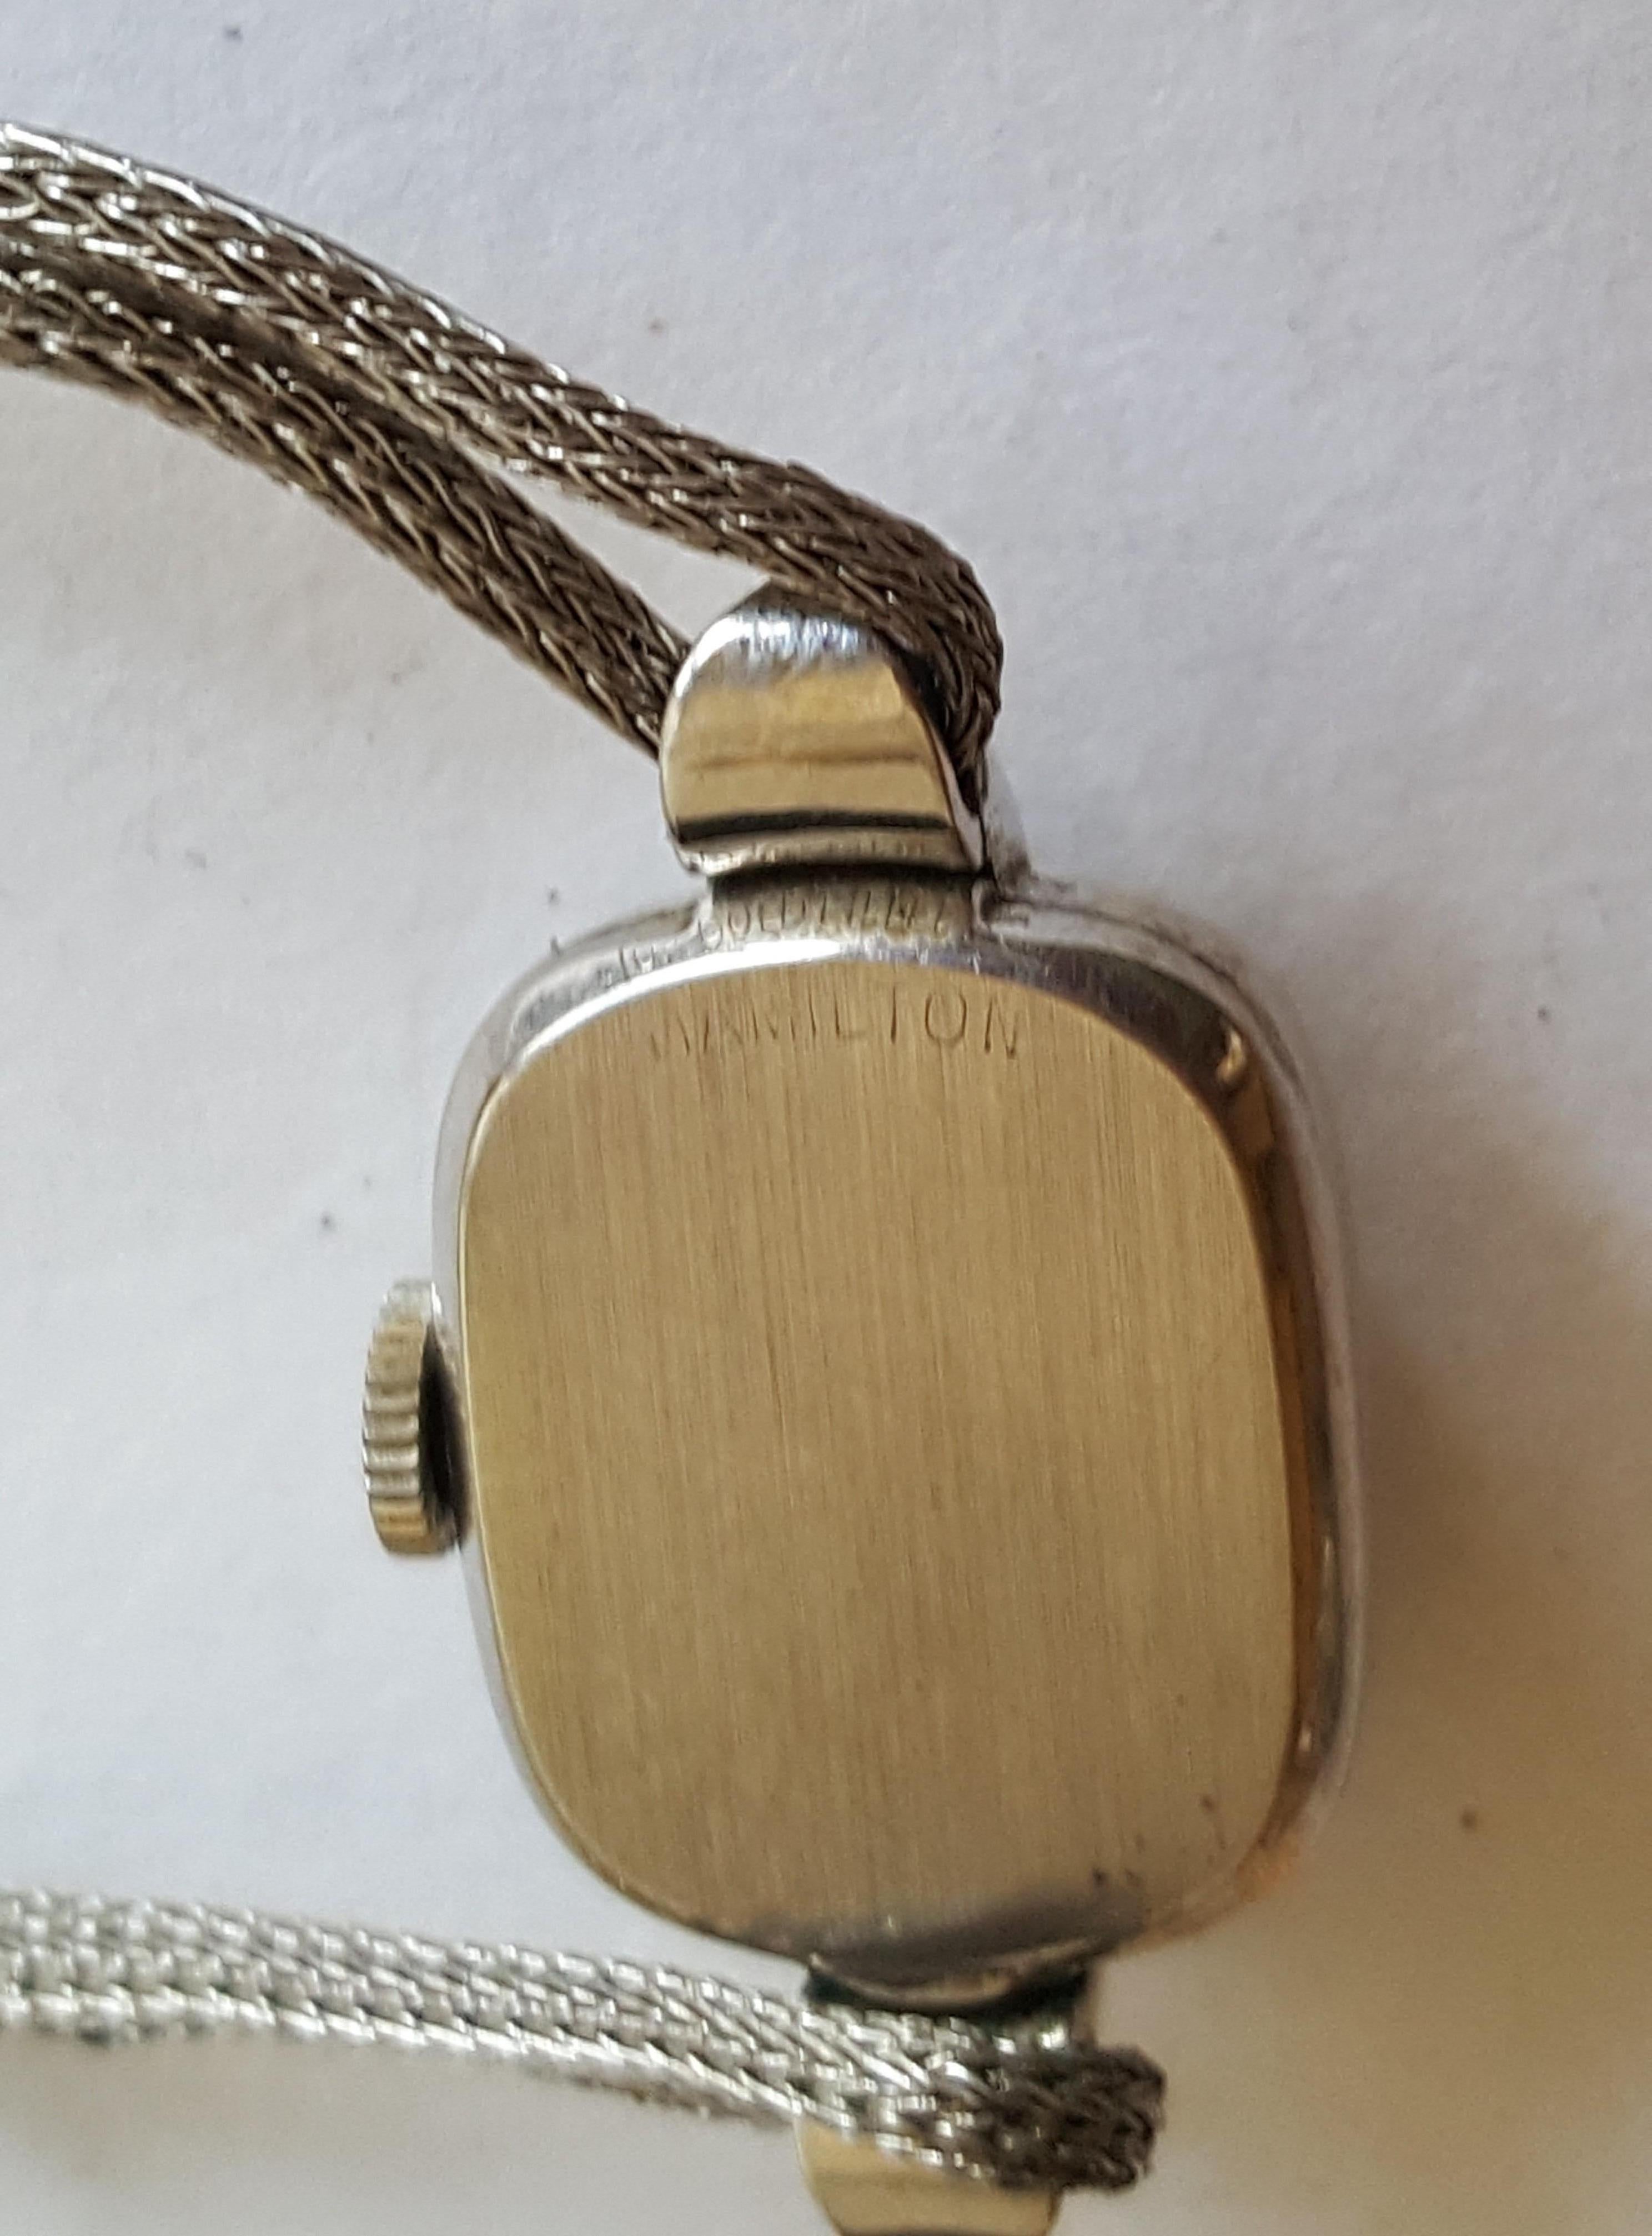 Vintage 1920-30's Gruen Precision Watch, 10kt Gold Filled, 15mm x 17mm Case, Gold Numerals, Off White Face, Hamilton Case, Kreisler 10Kt White gold and Stainless Steel Strap. Fold clasp, Not working. Mesh strap has some fraying. Strap is petite, 5